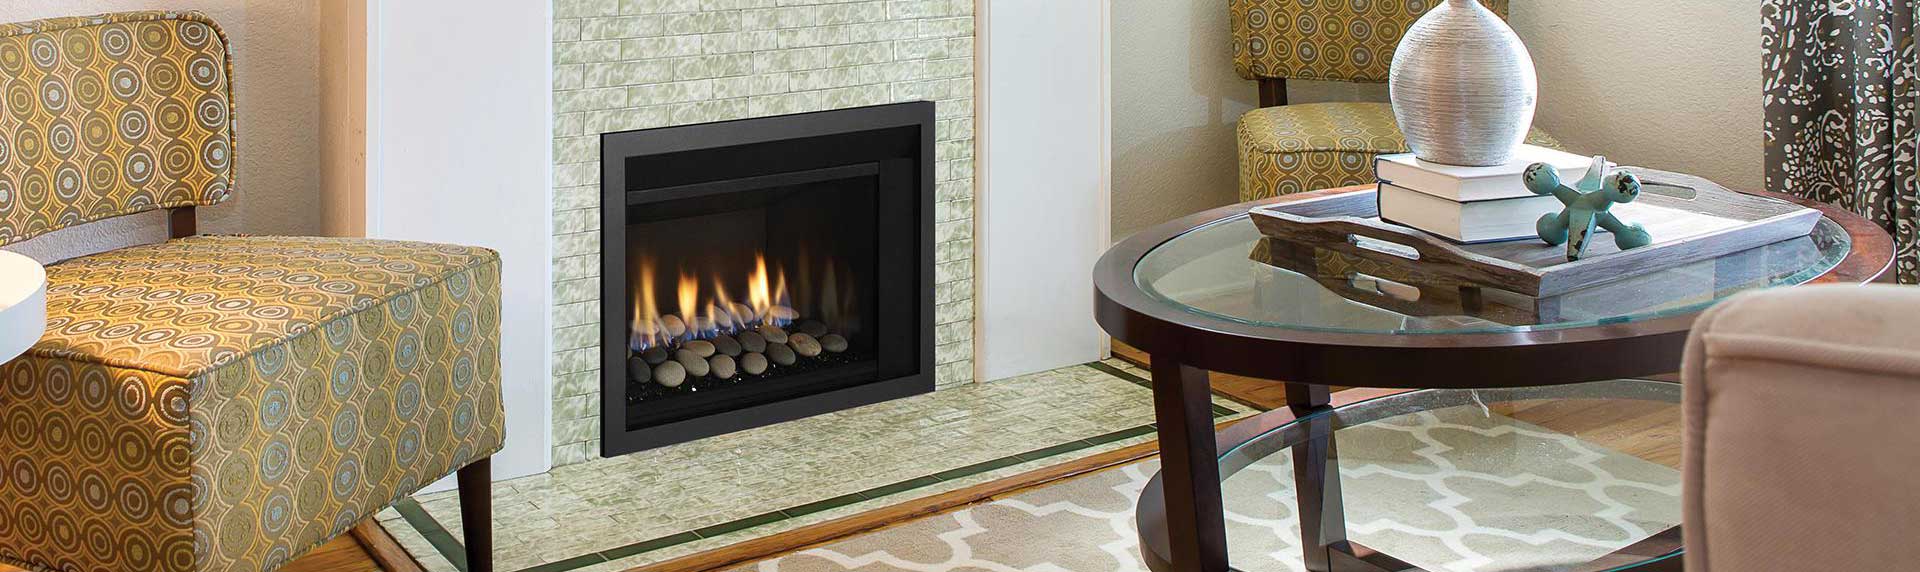 Modern Gas Insert with tile surround and white mantle